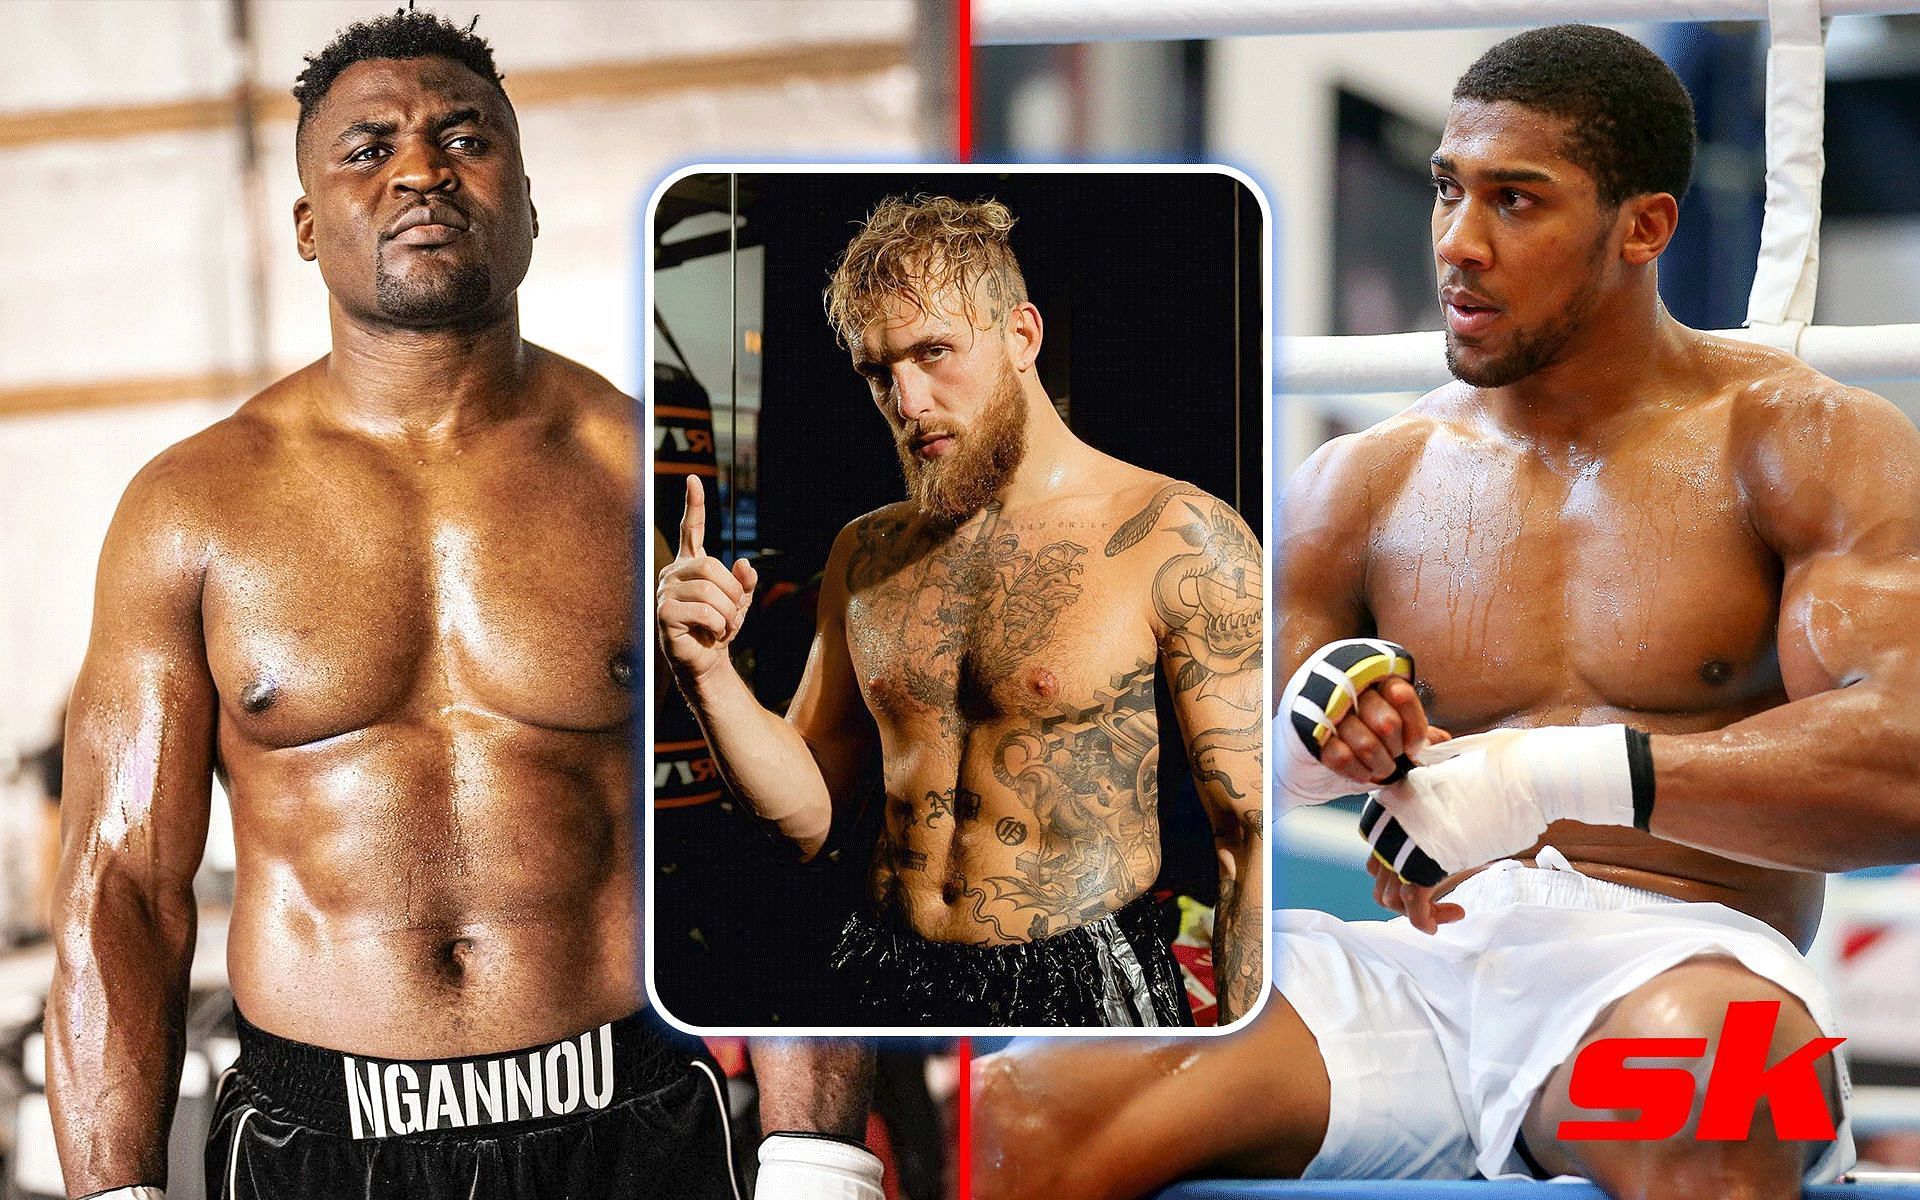 Francis Ngannou (left), Jake Paul (middle), and Anthony Joshua (right) [Images courtesy: @francisngannou on Instagram, @jakepaul on Instagram, and Getty Images]